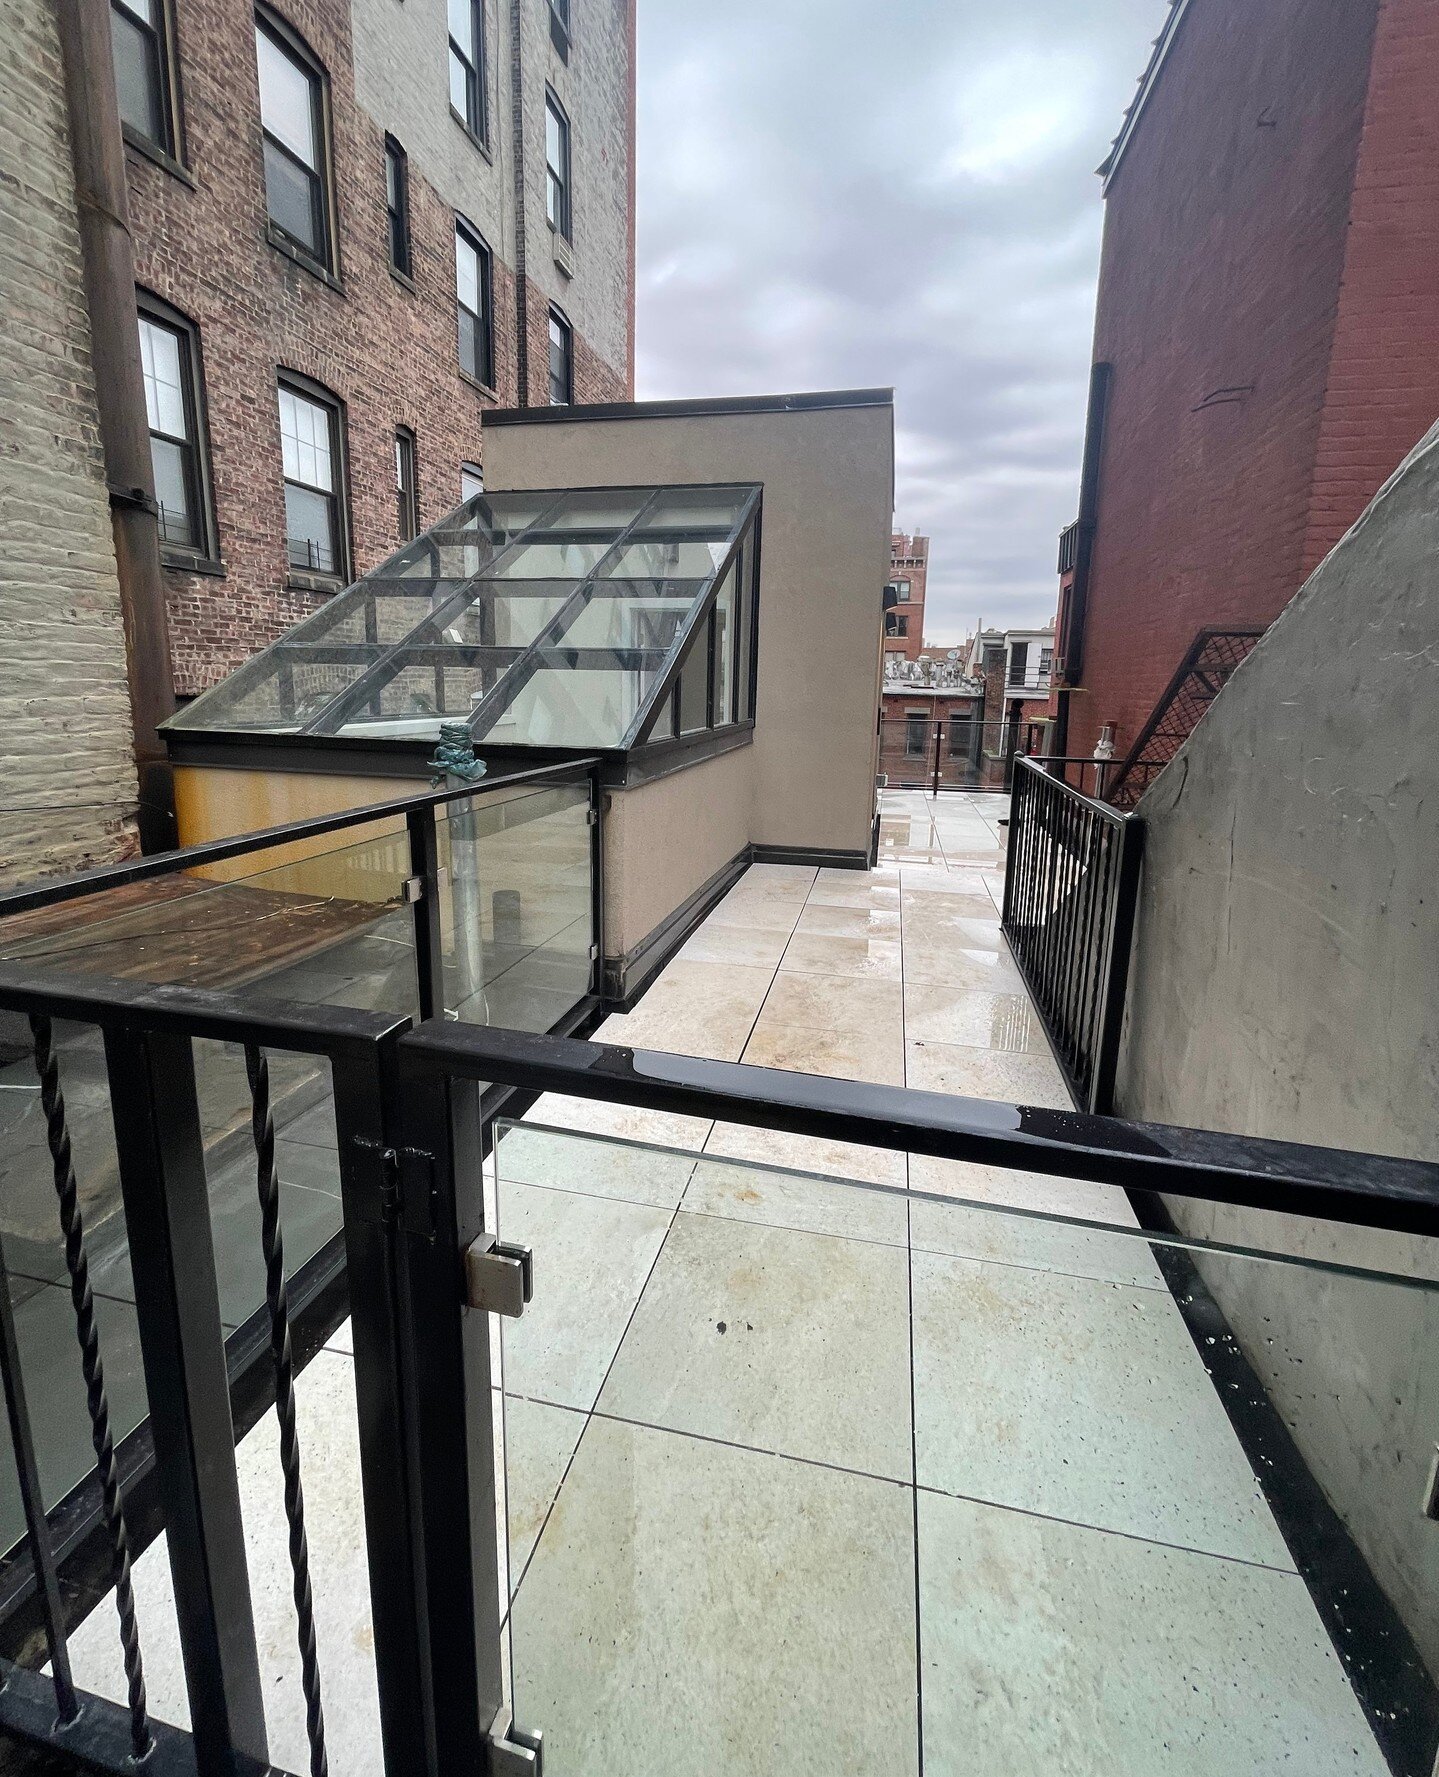 An unused rooftop becomes the Penthouse level! A new glass enclosed staircase winds up to the new top floor, with new energy efficient HVAC systems, exterior lighting and a massive roofdeck finished with natural stone pavers and a custom glass railin